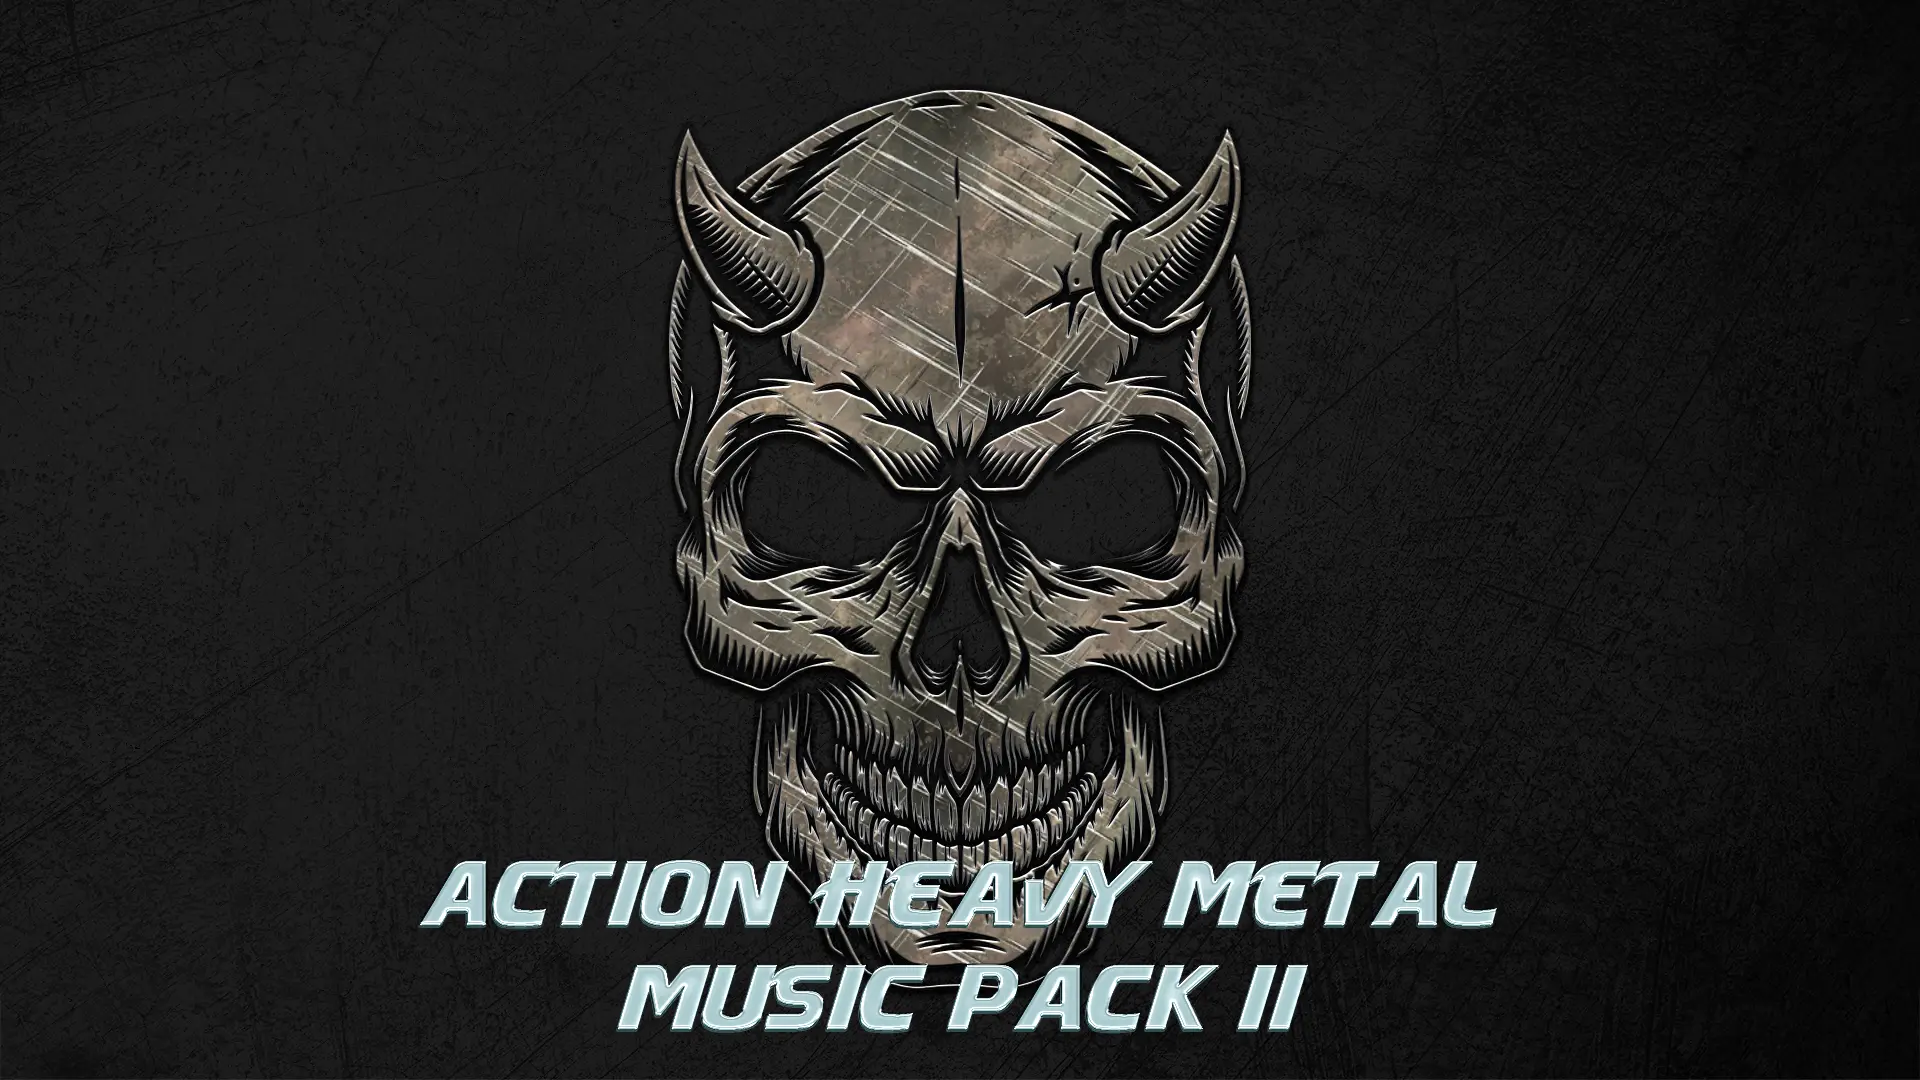 Action Heavy Metal Music Pack 2